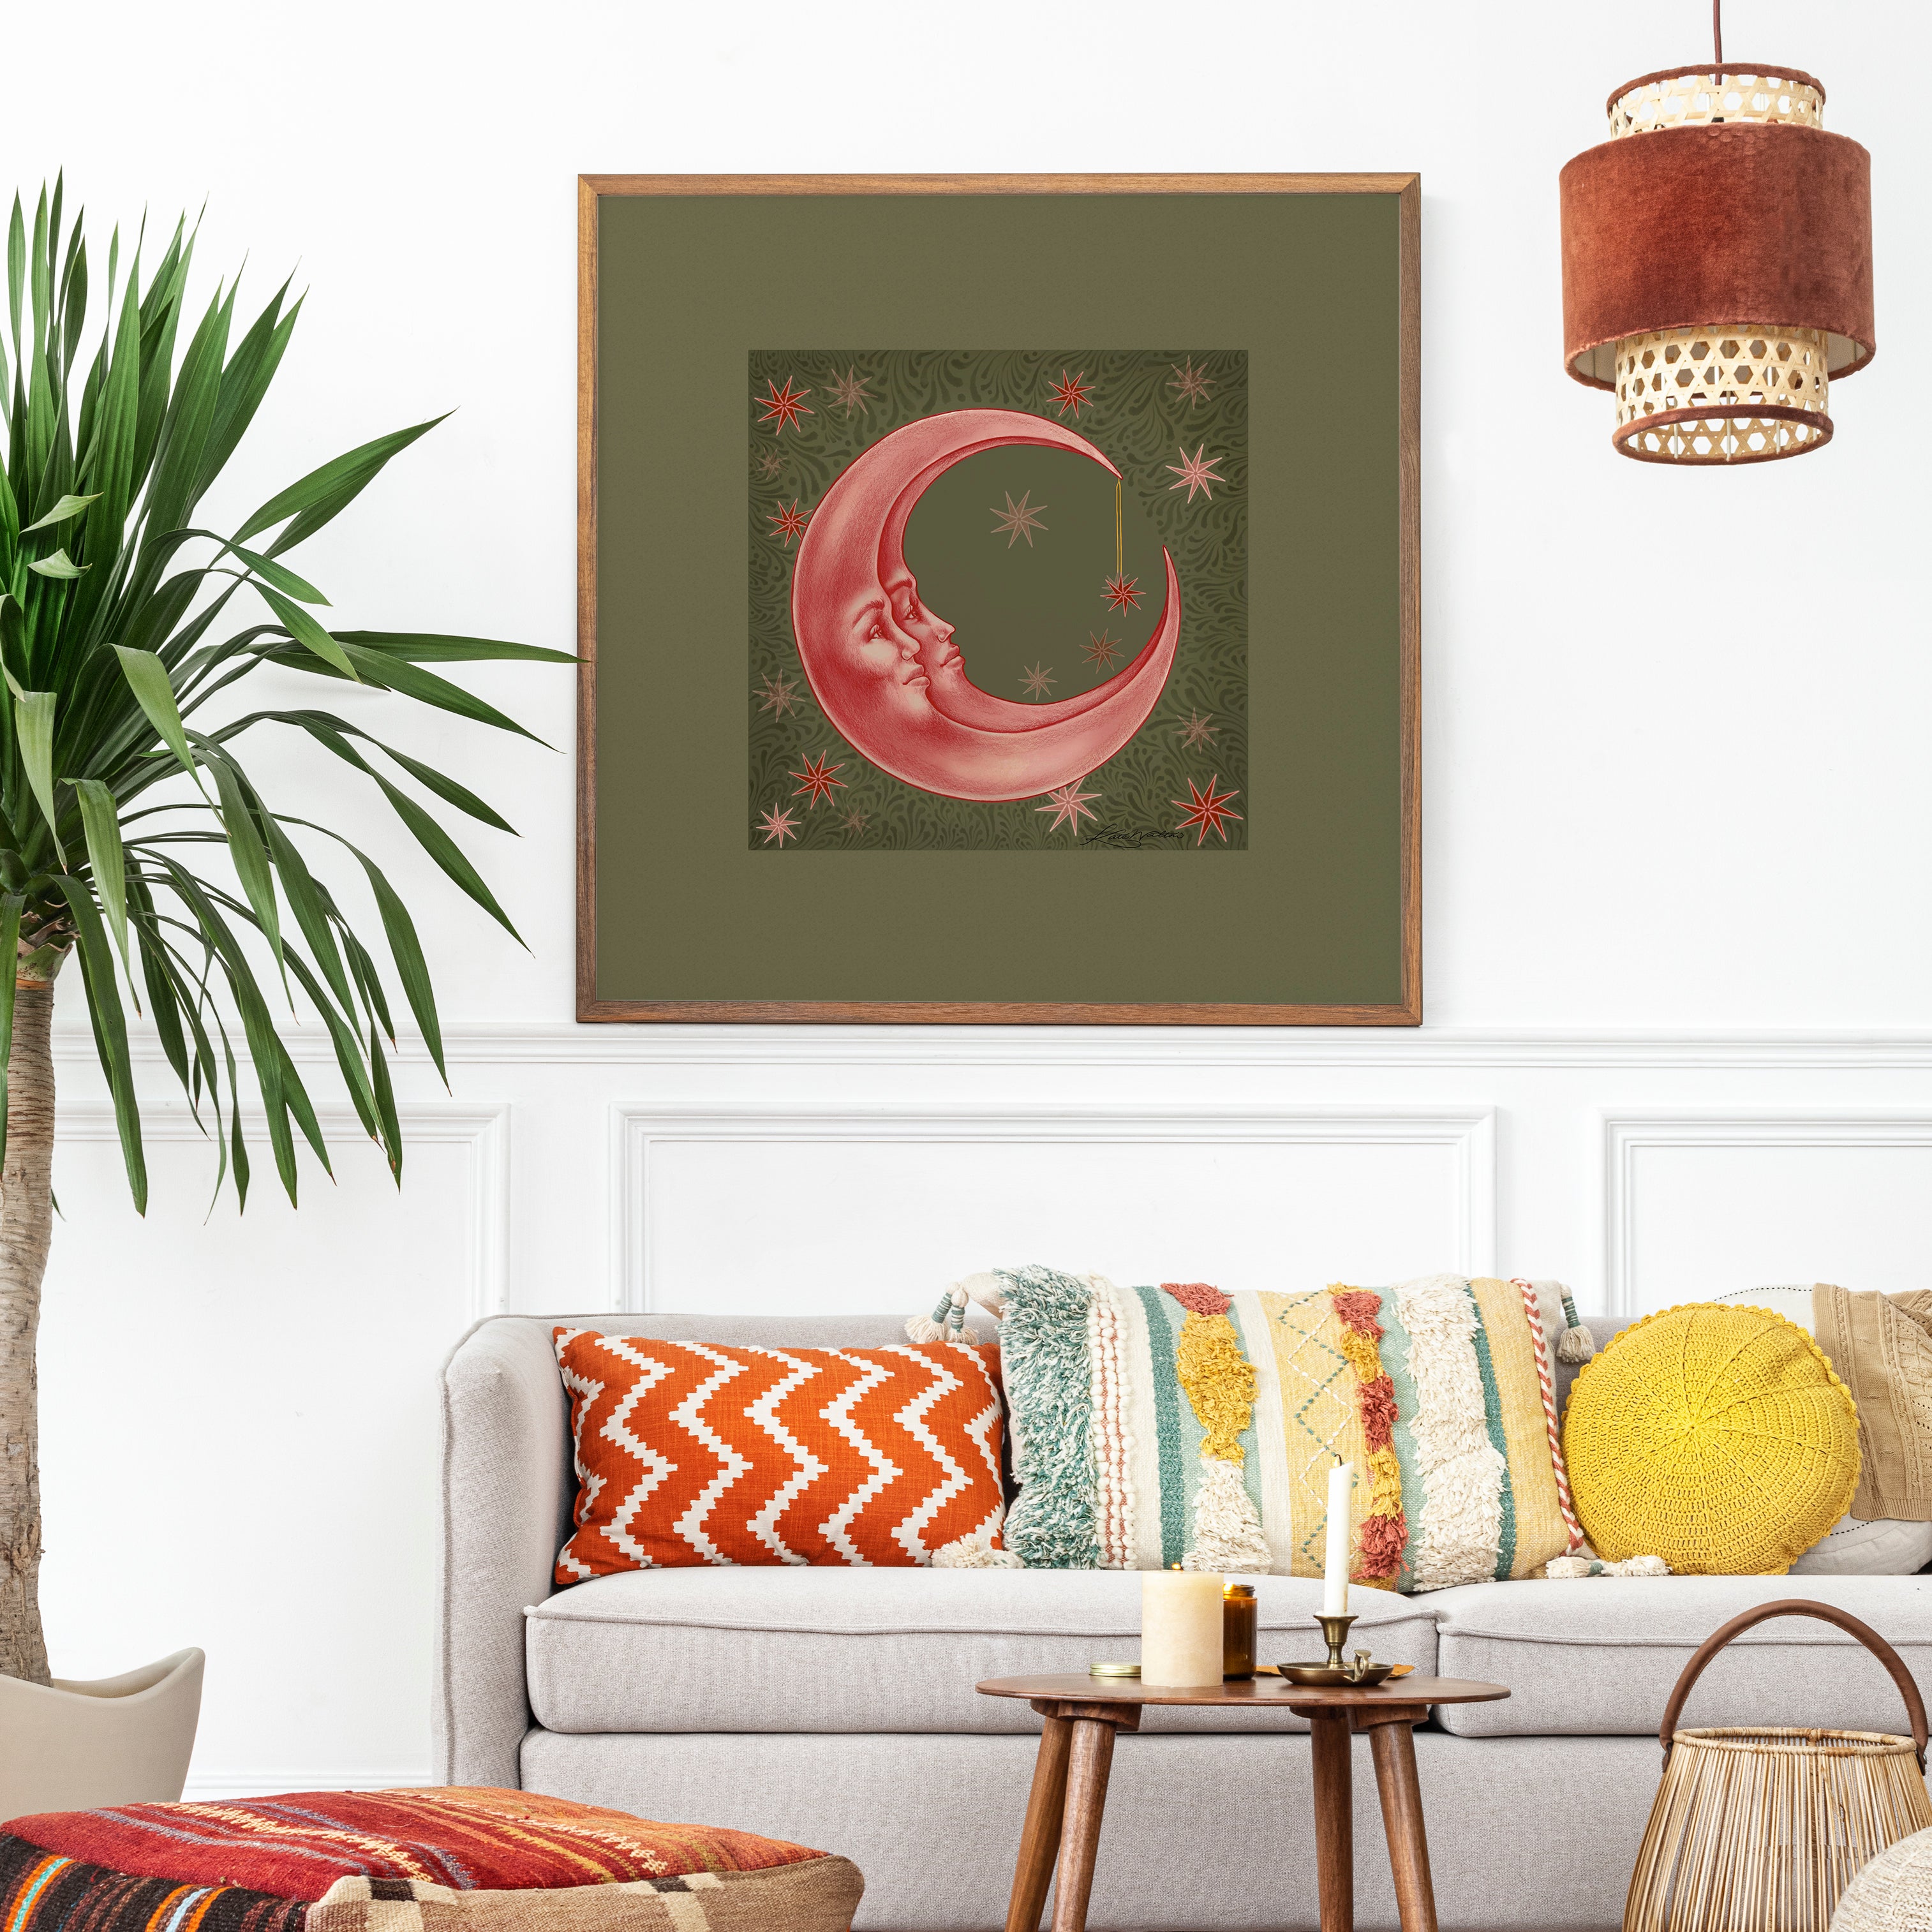 FSC paper, handpainted, premium, Giclée print, high quality print, hand painted, carbon neutral, ethical, ethical art, ethereal painting, botanical print, artwork, crescent moon, independent artist